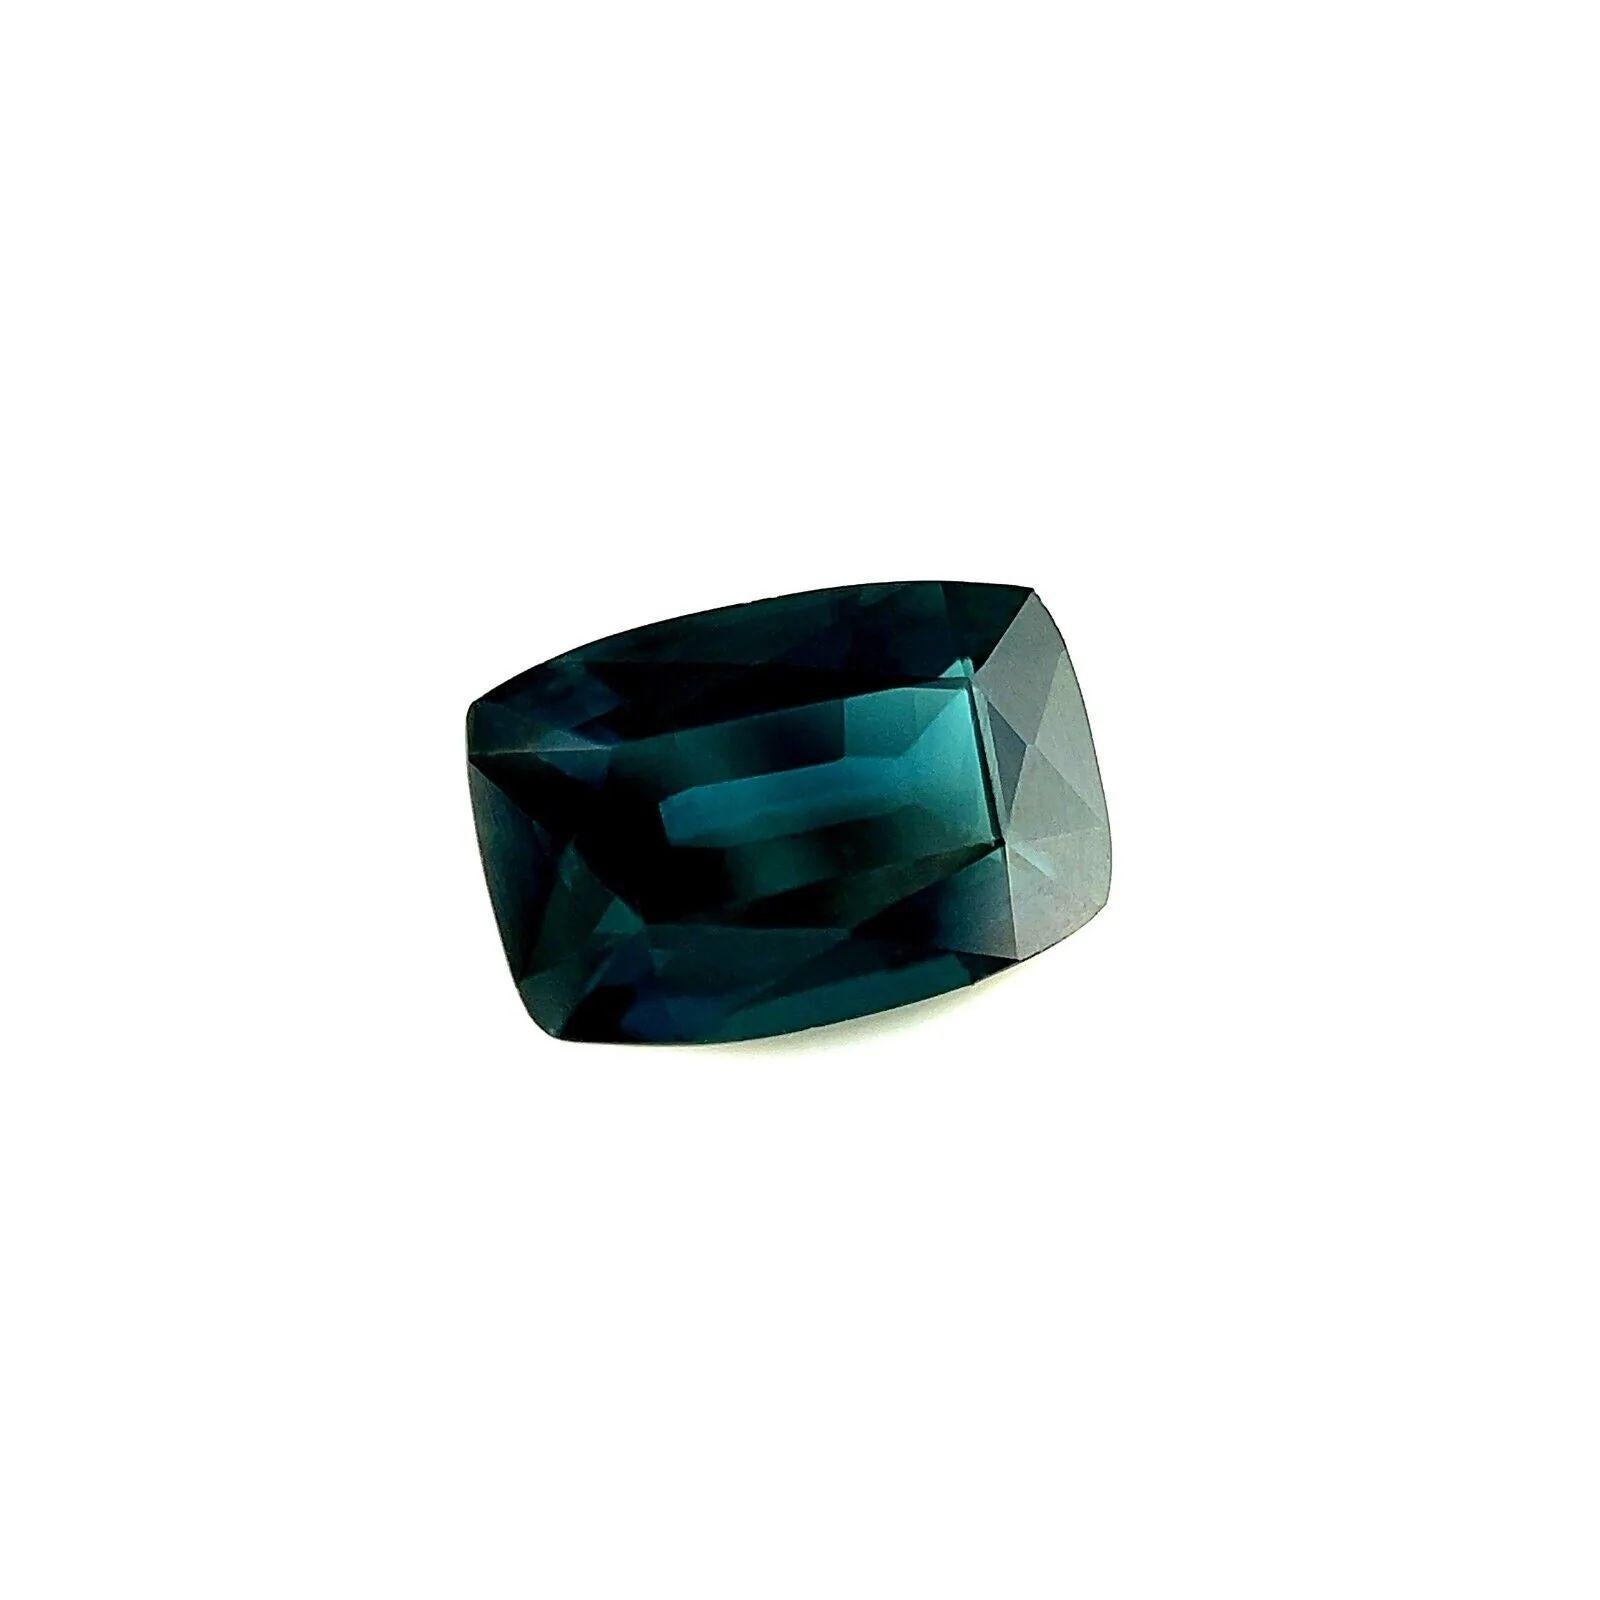 GRA Certified 2.06ct Green Blue Sapphire Loose Cushion Cut Gem 9.3x6.4mm

GRA Certified Deep Green Blue Sapphire Gemstone.
2.06 Carat sapphire with a beautiful deep green blue colour.
Standard heated like nearly all sapphires on the market. No